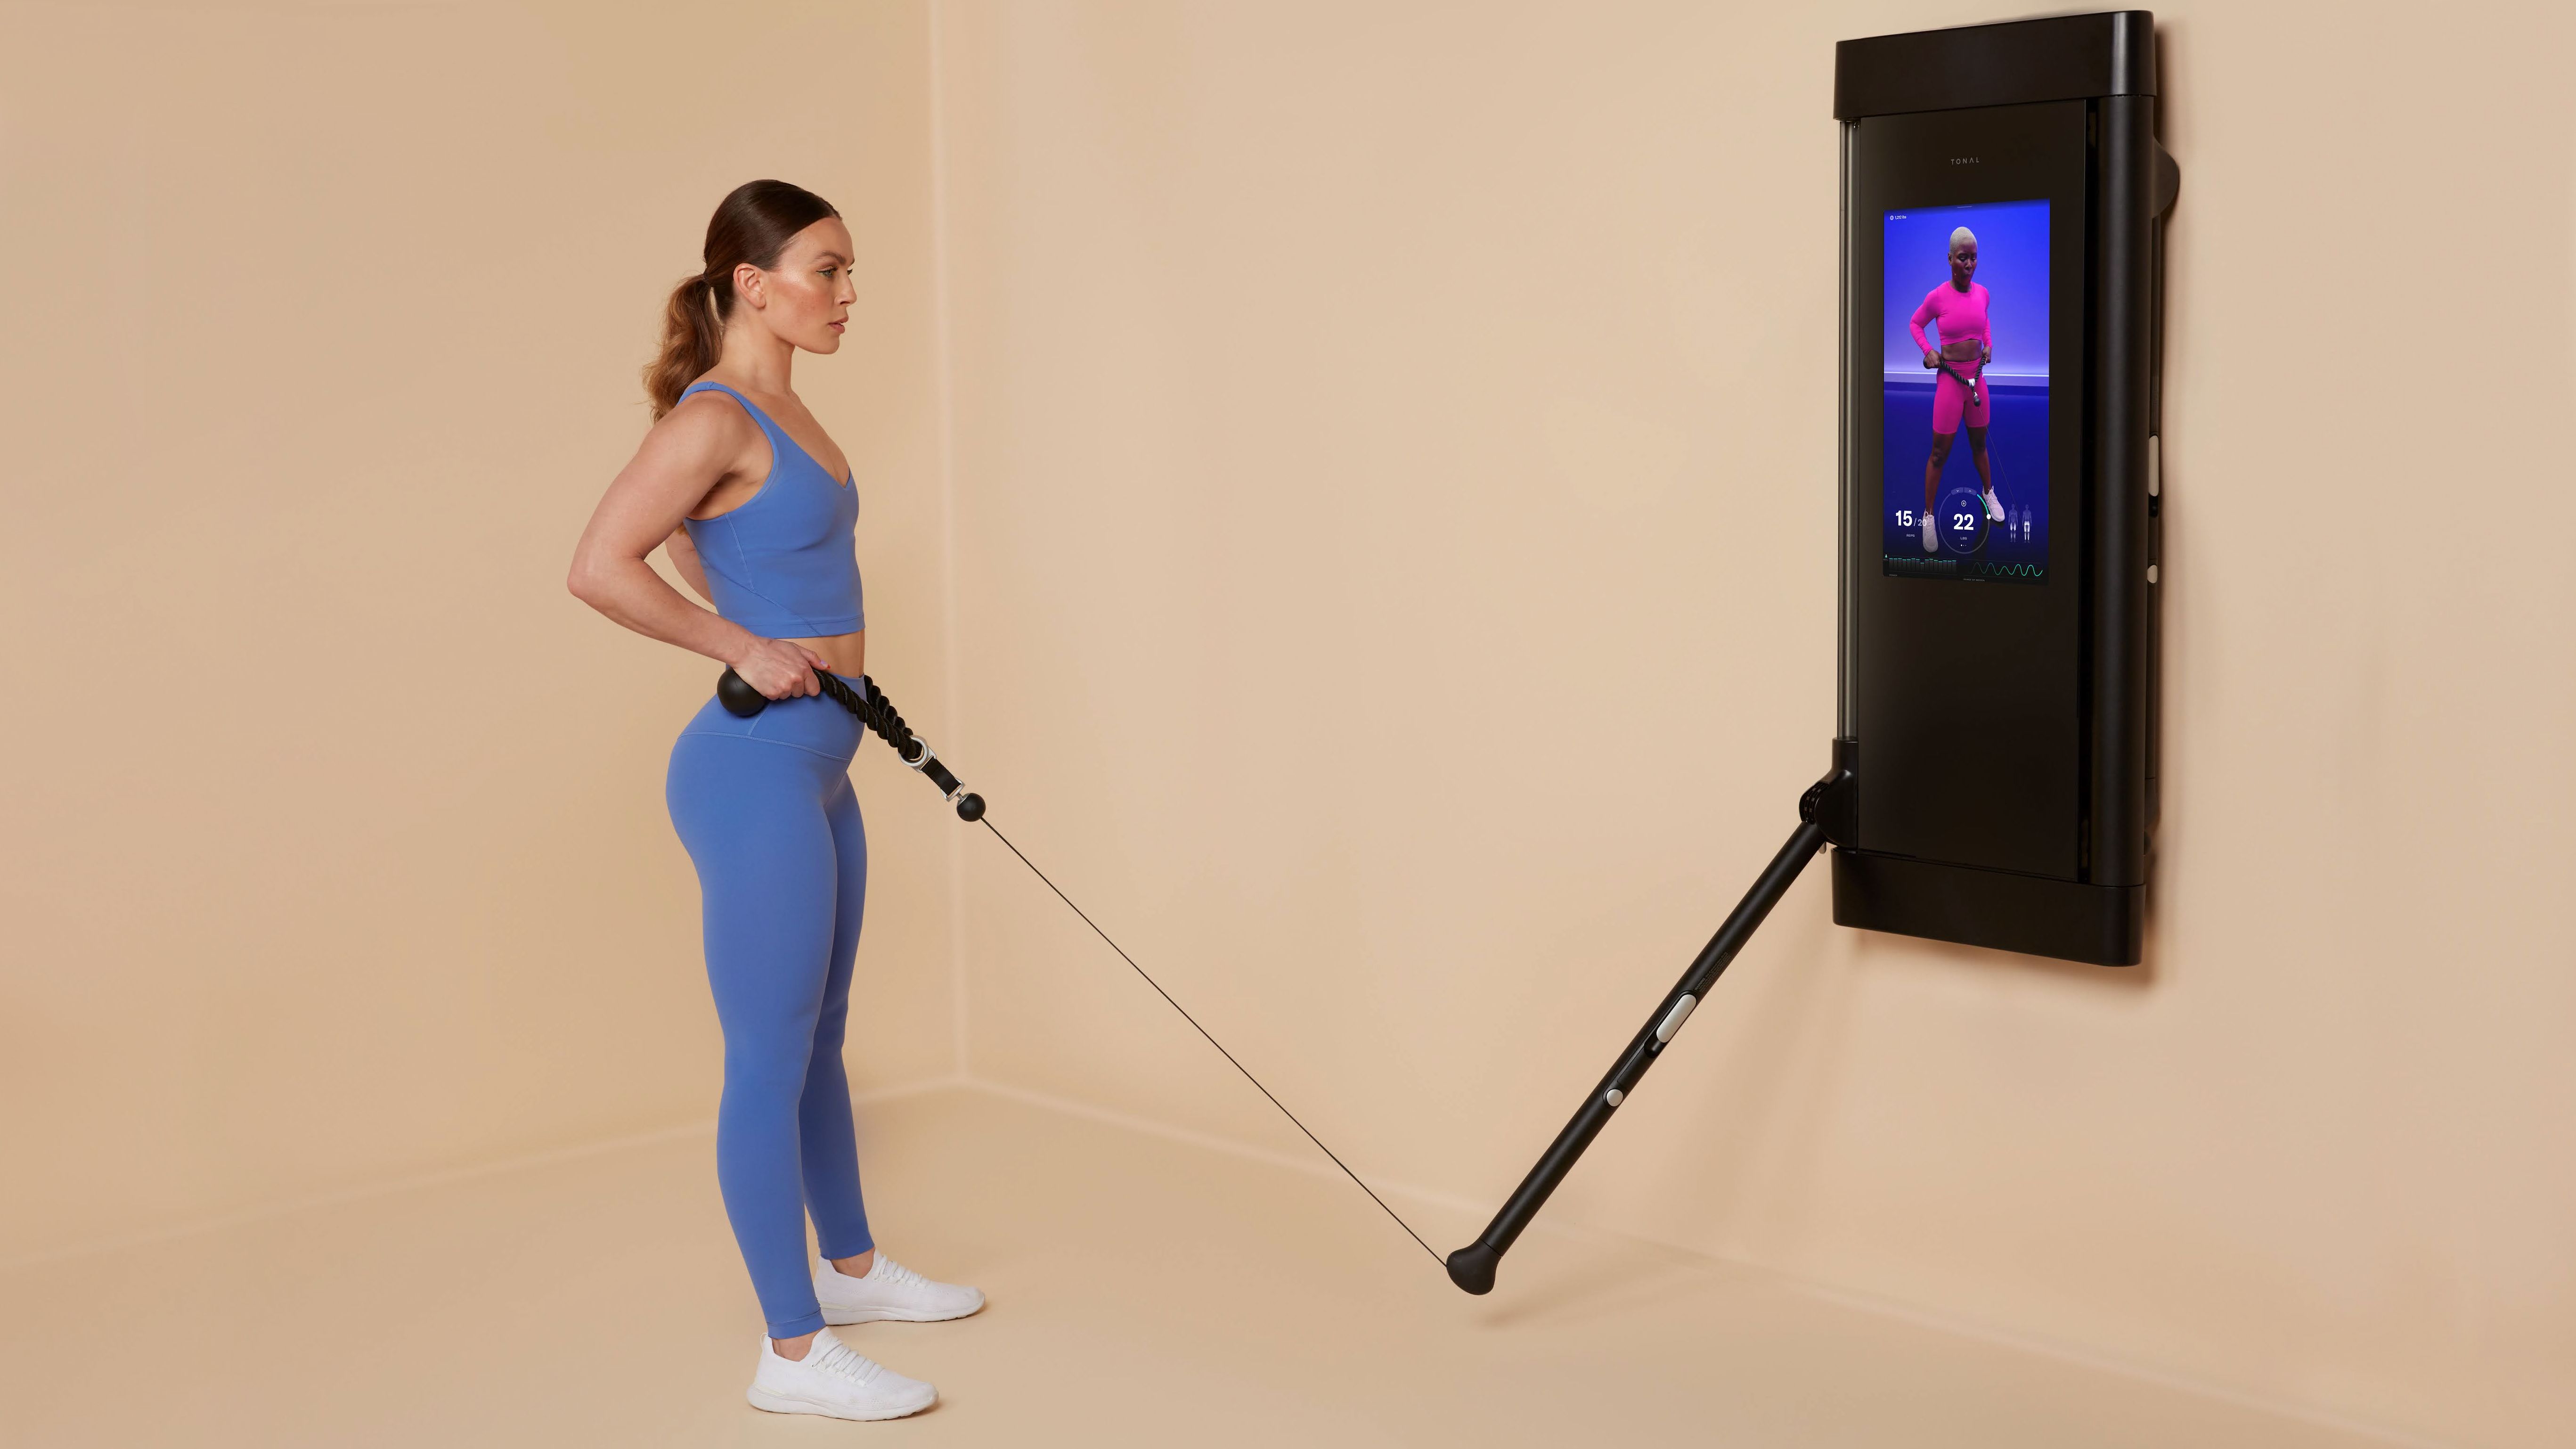 Tonal Review for 2022: Is This Smart Home Gym Worth It?